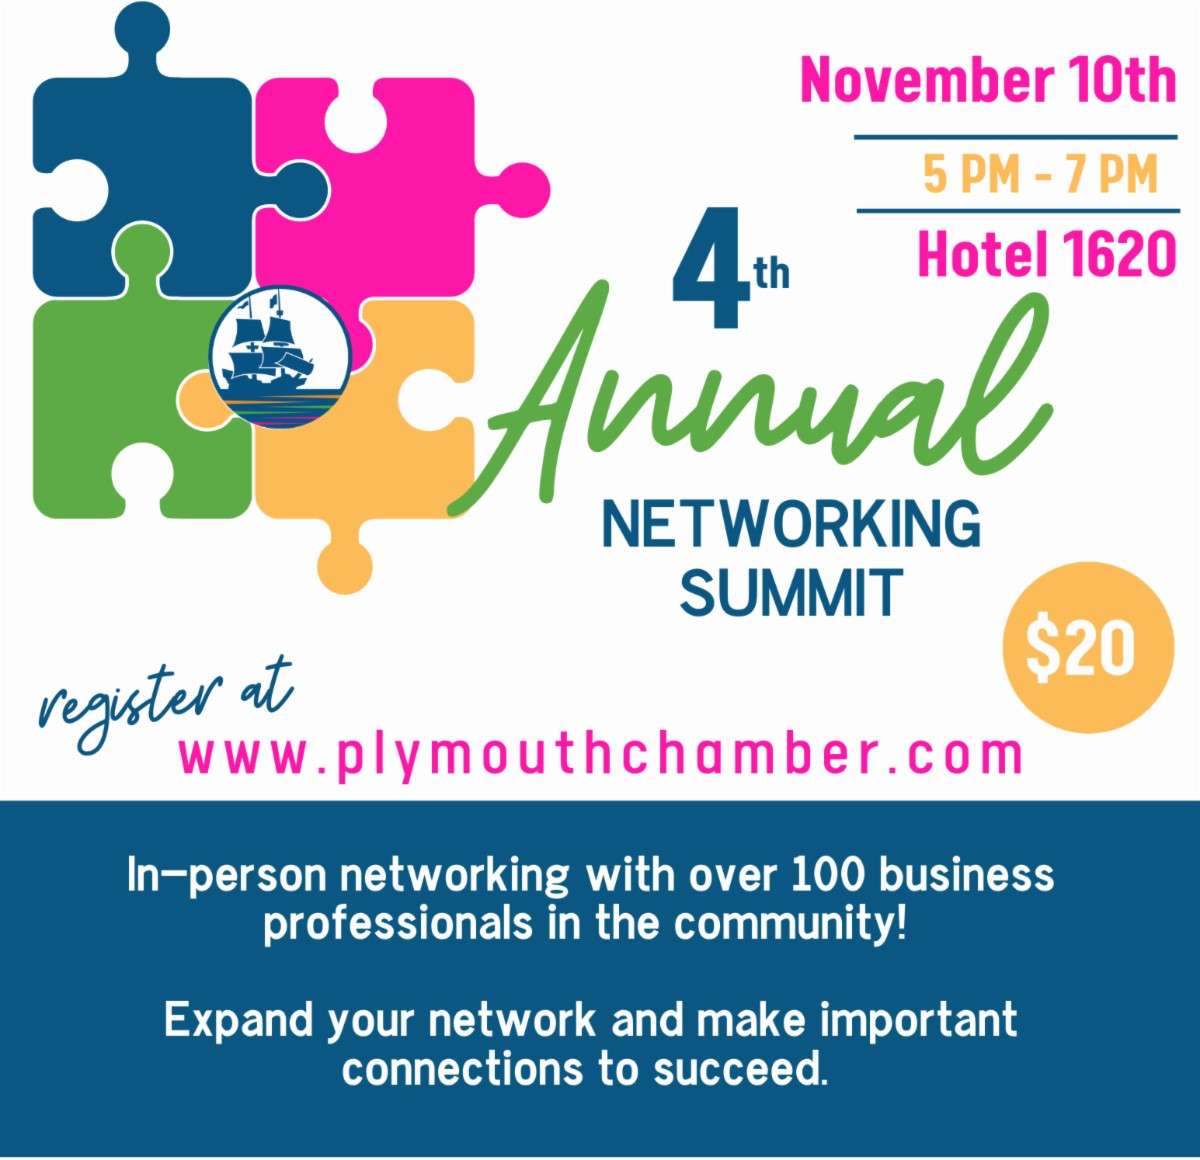 Plymouth Chamber Networking Summit